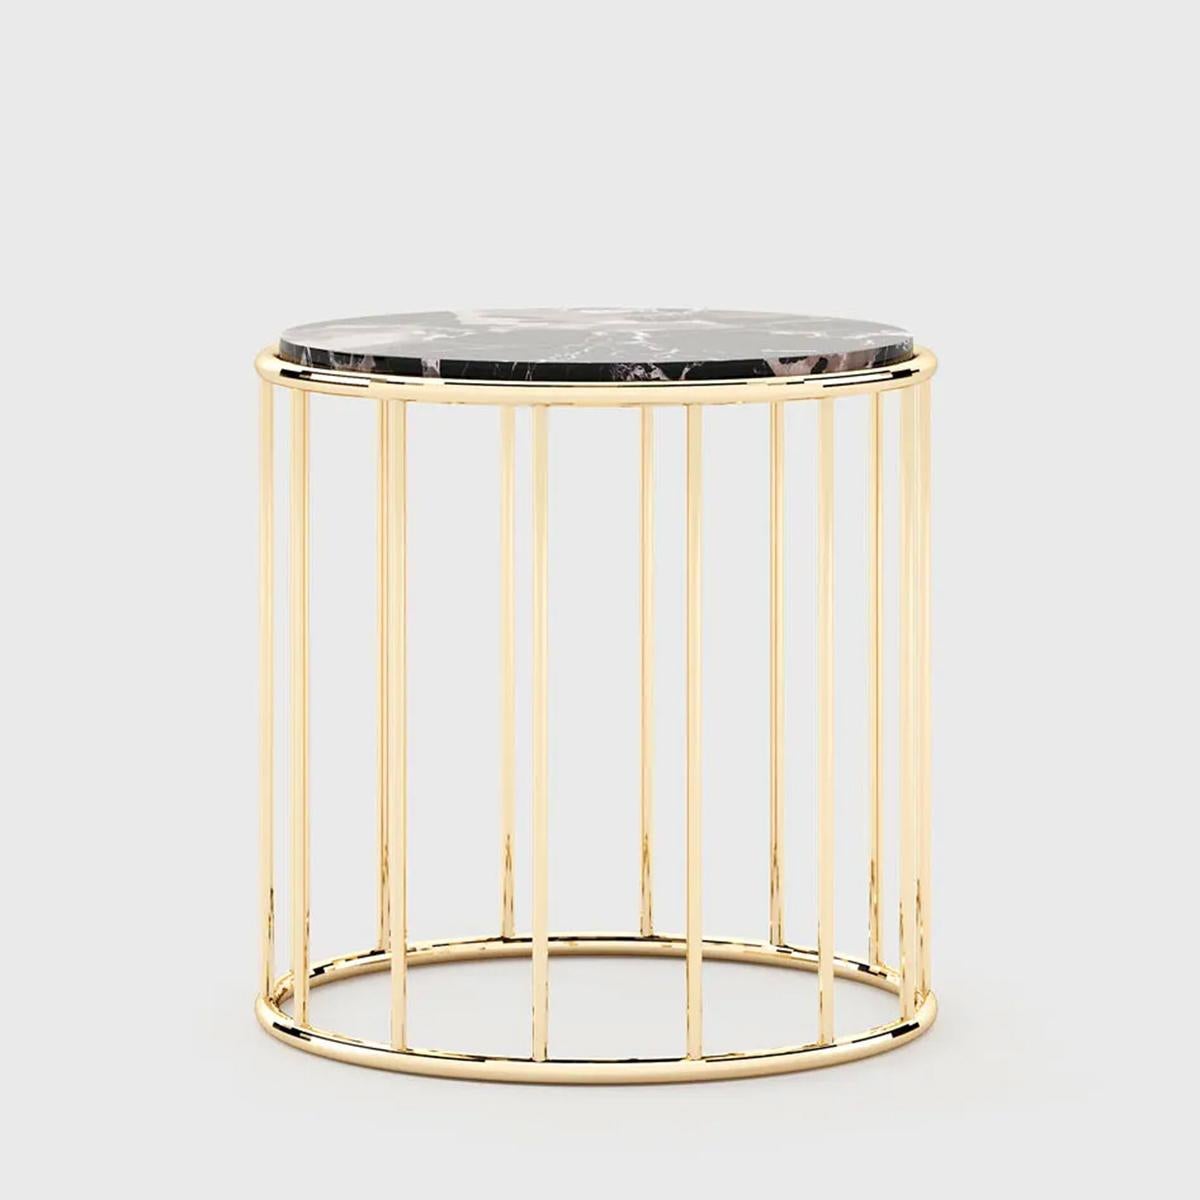 Side Table Arteum with polished marble top
and with polished stainless steel structure ingold finish.
Also available in other finishes on request, including 
up-charges according to finishes.